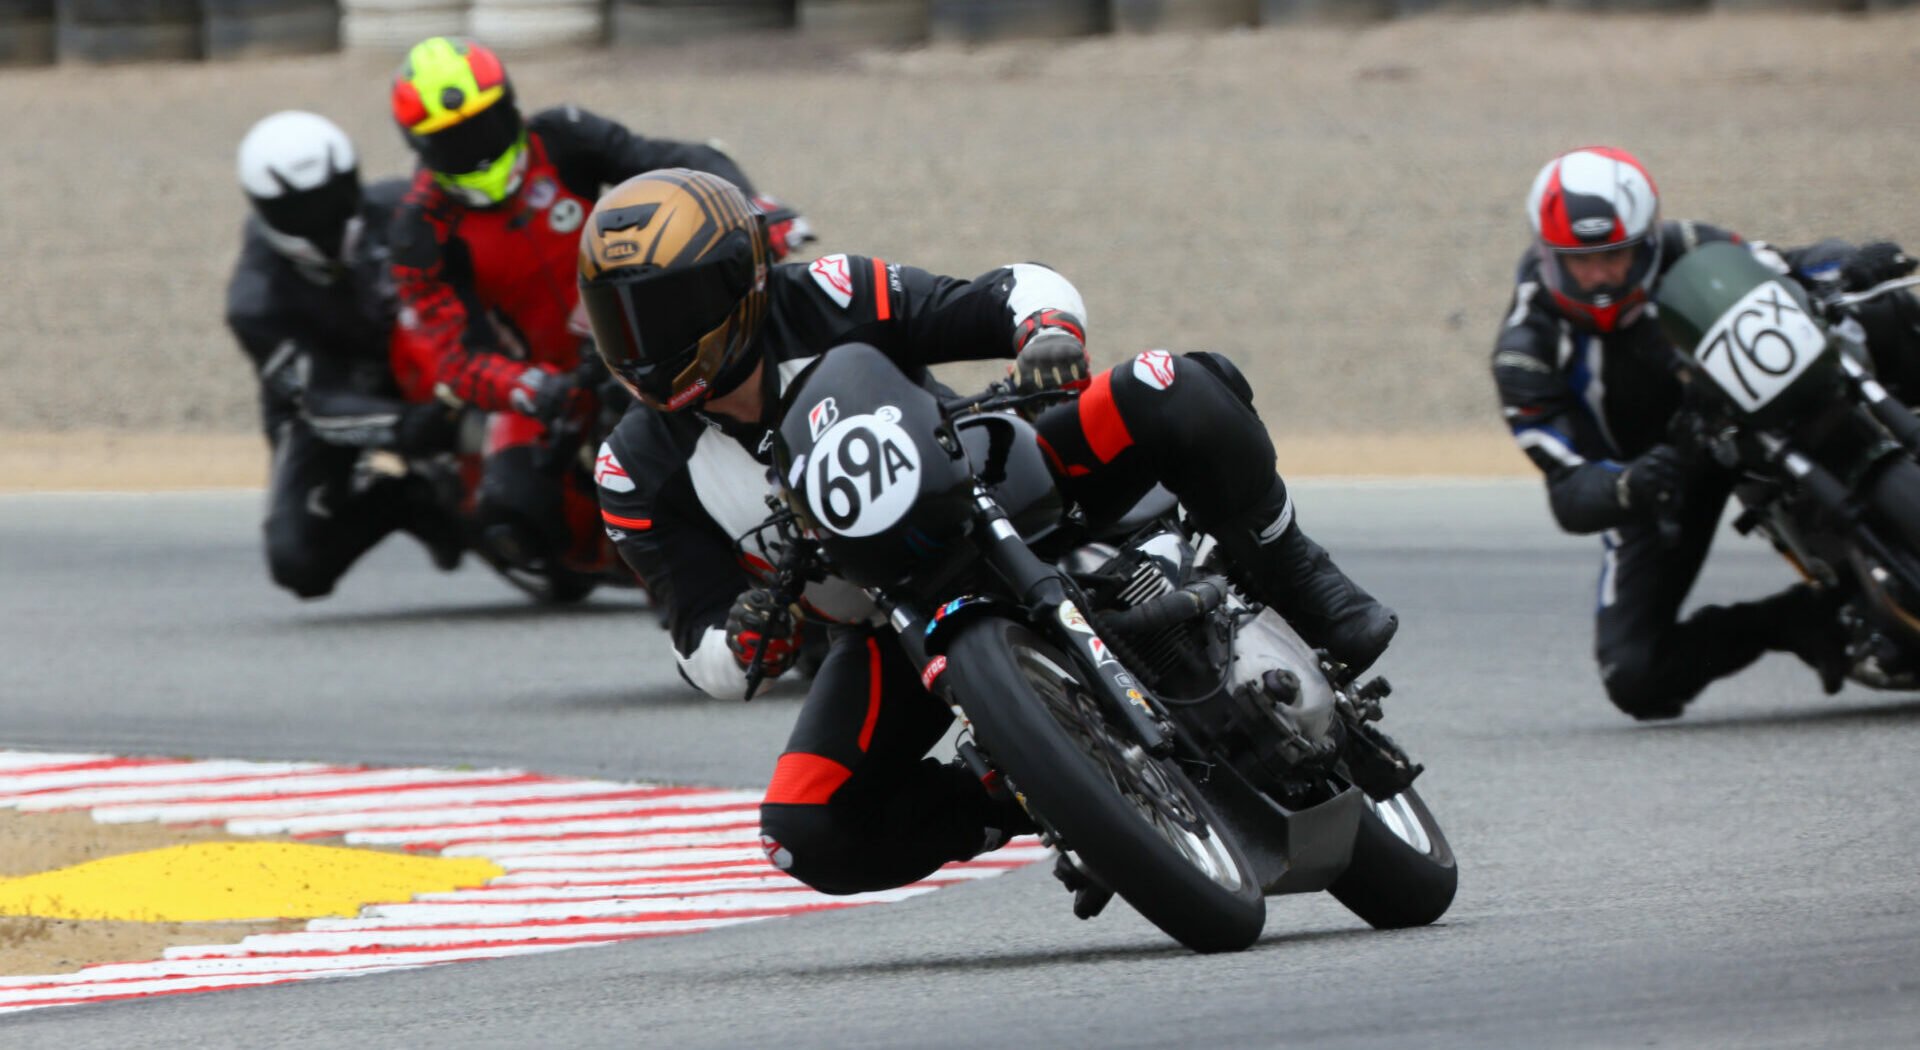 AHRMA Thruxton Cup Challenge racers Carl Estell (69A) and Patrick McGraw (76X) carving Turn Three at Laguna Seca in 2021. Photo by etechphoto.com, courtesy AHRMA.